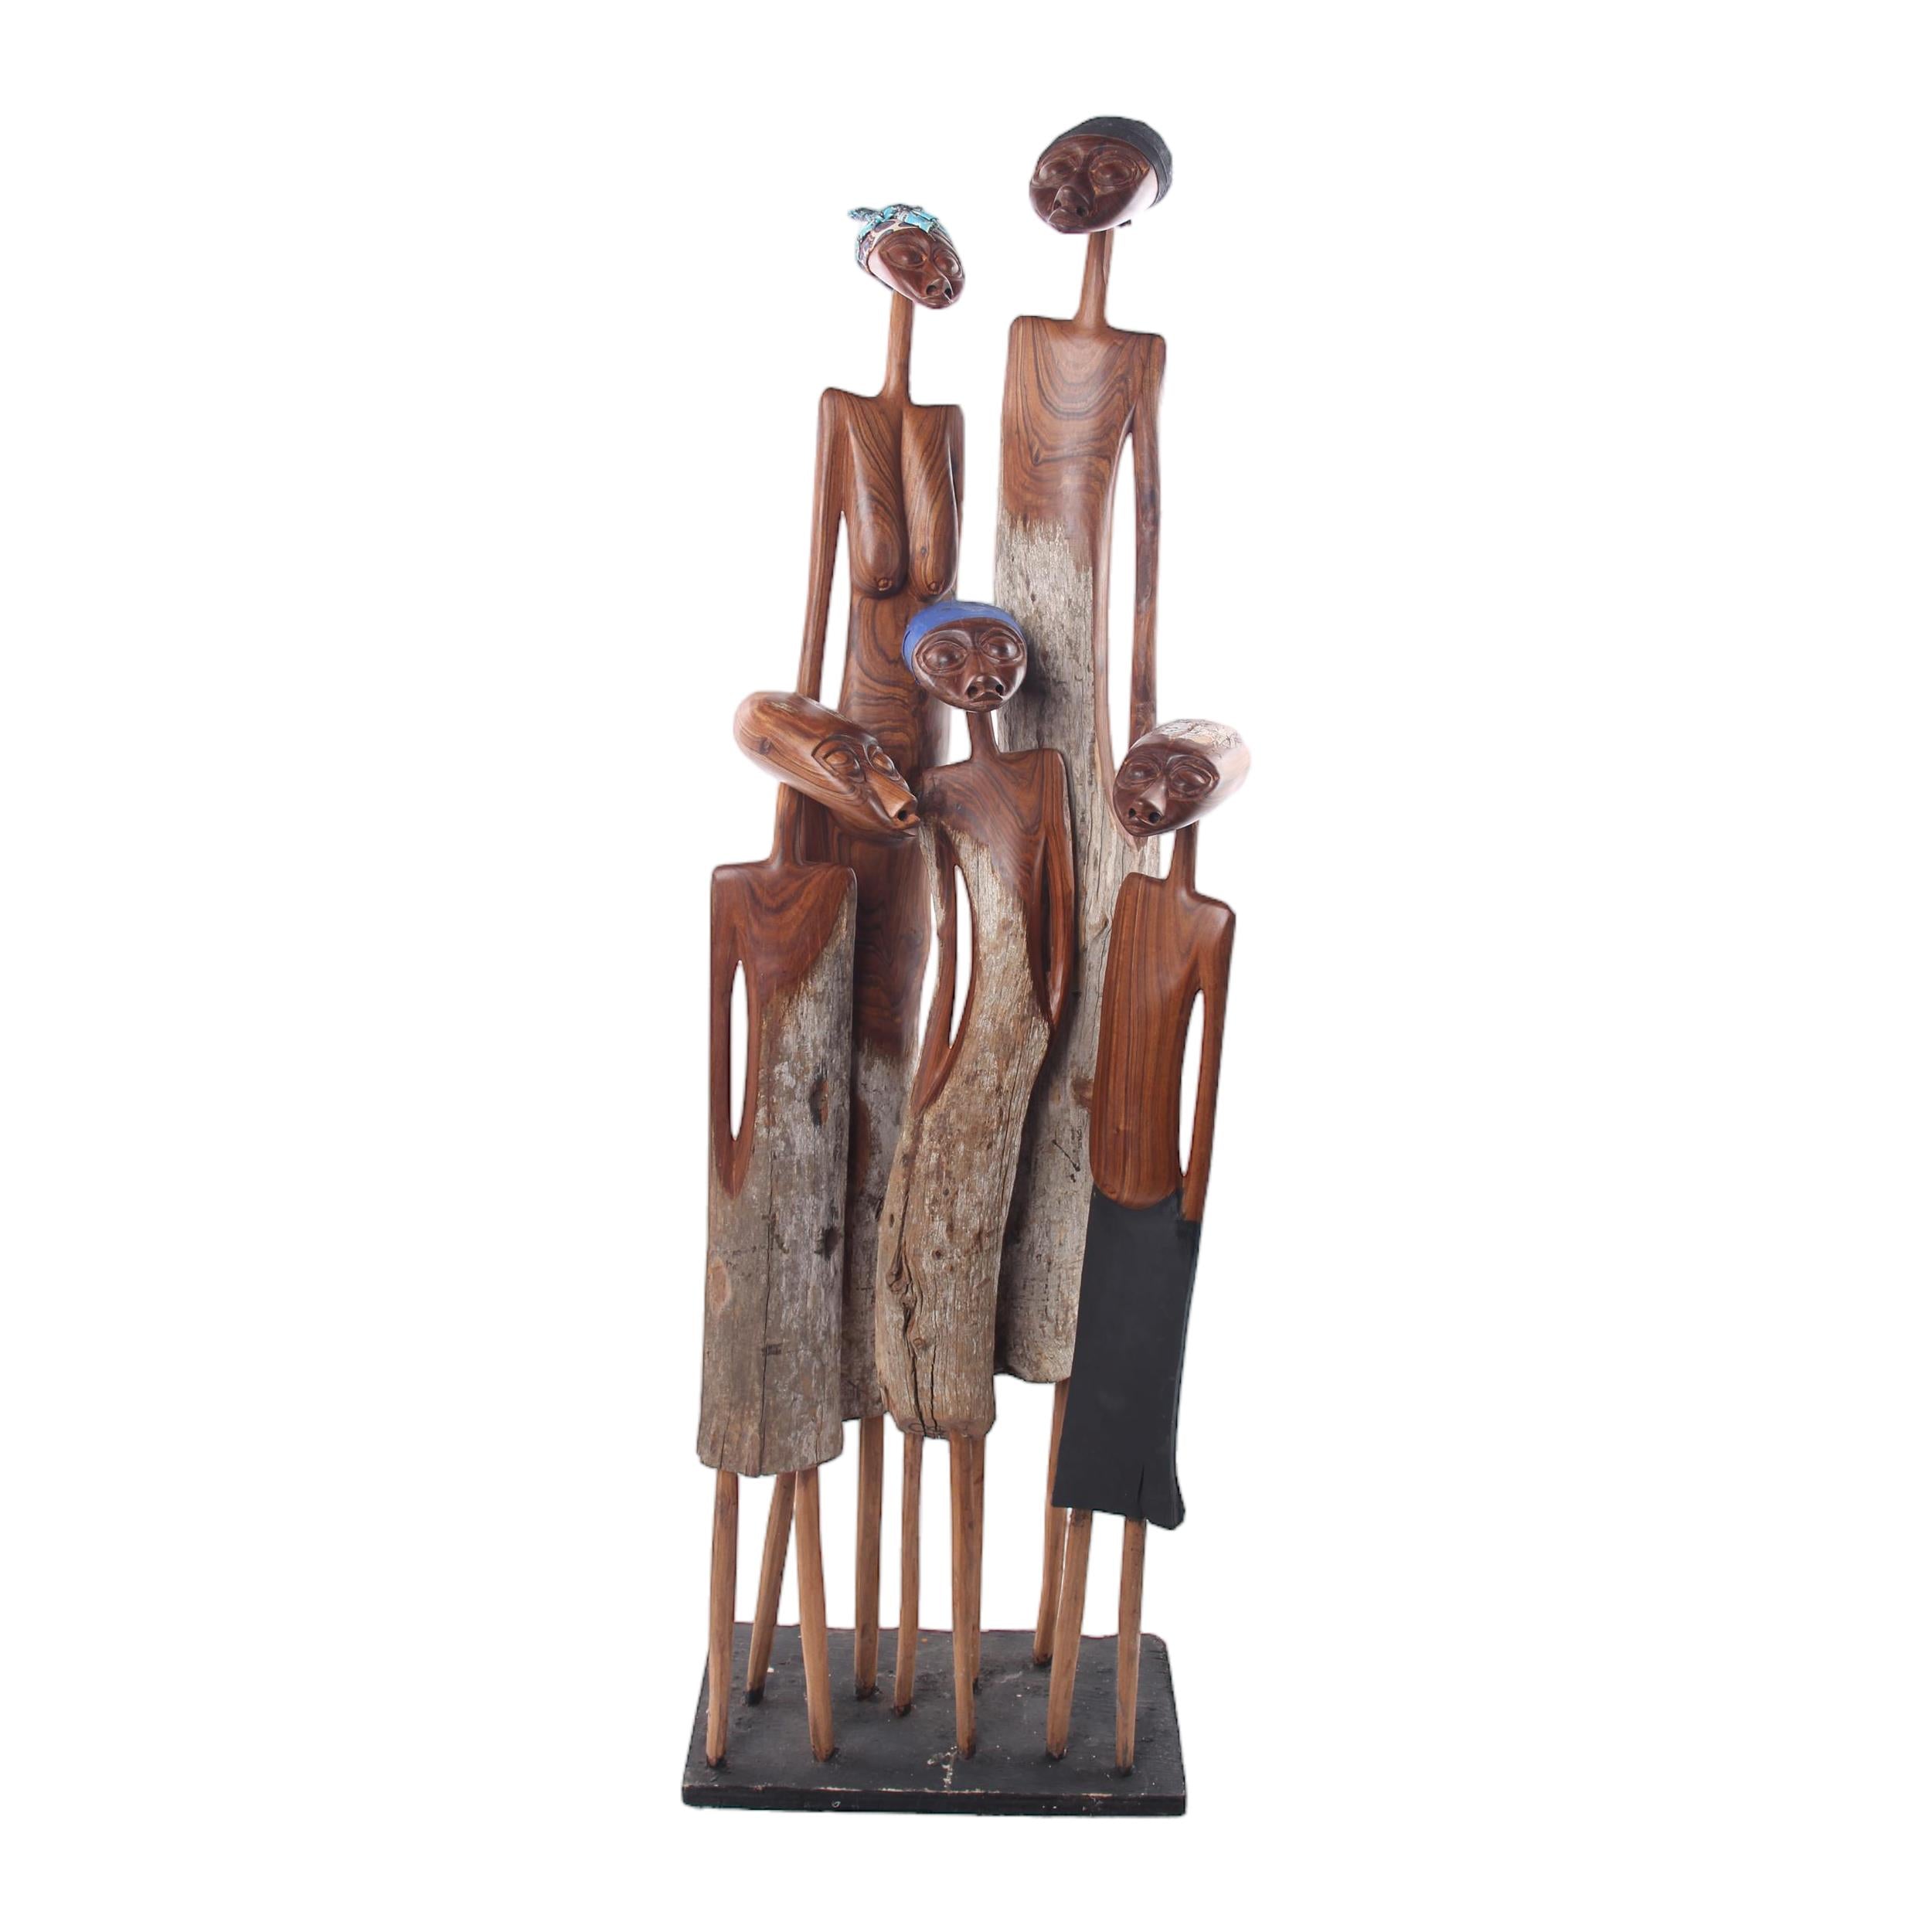 Makonde Tribe Wooden Families ~48.0" Tall - Wooden Families